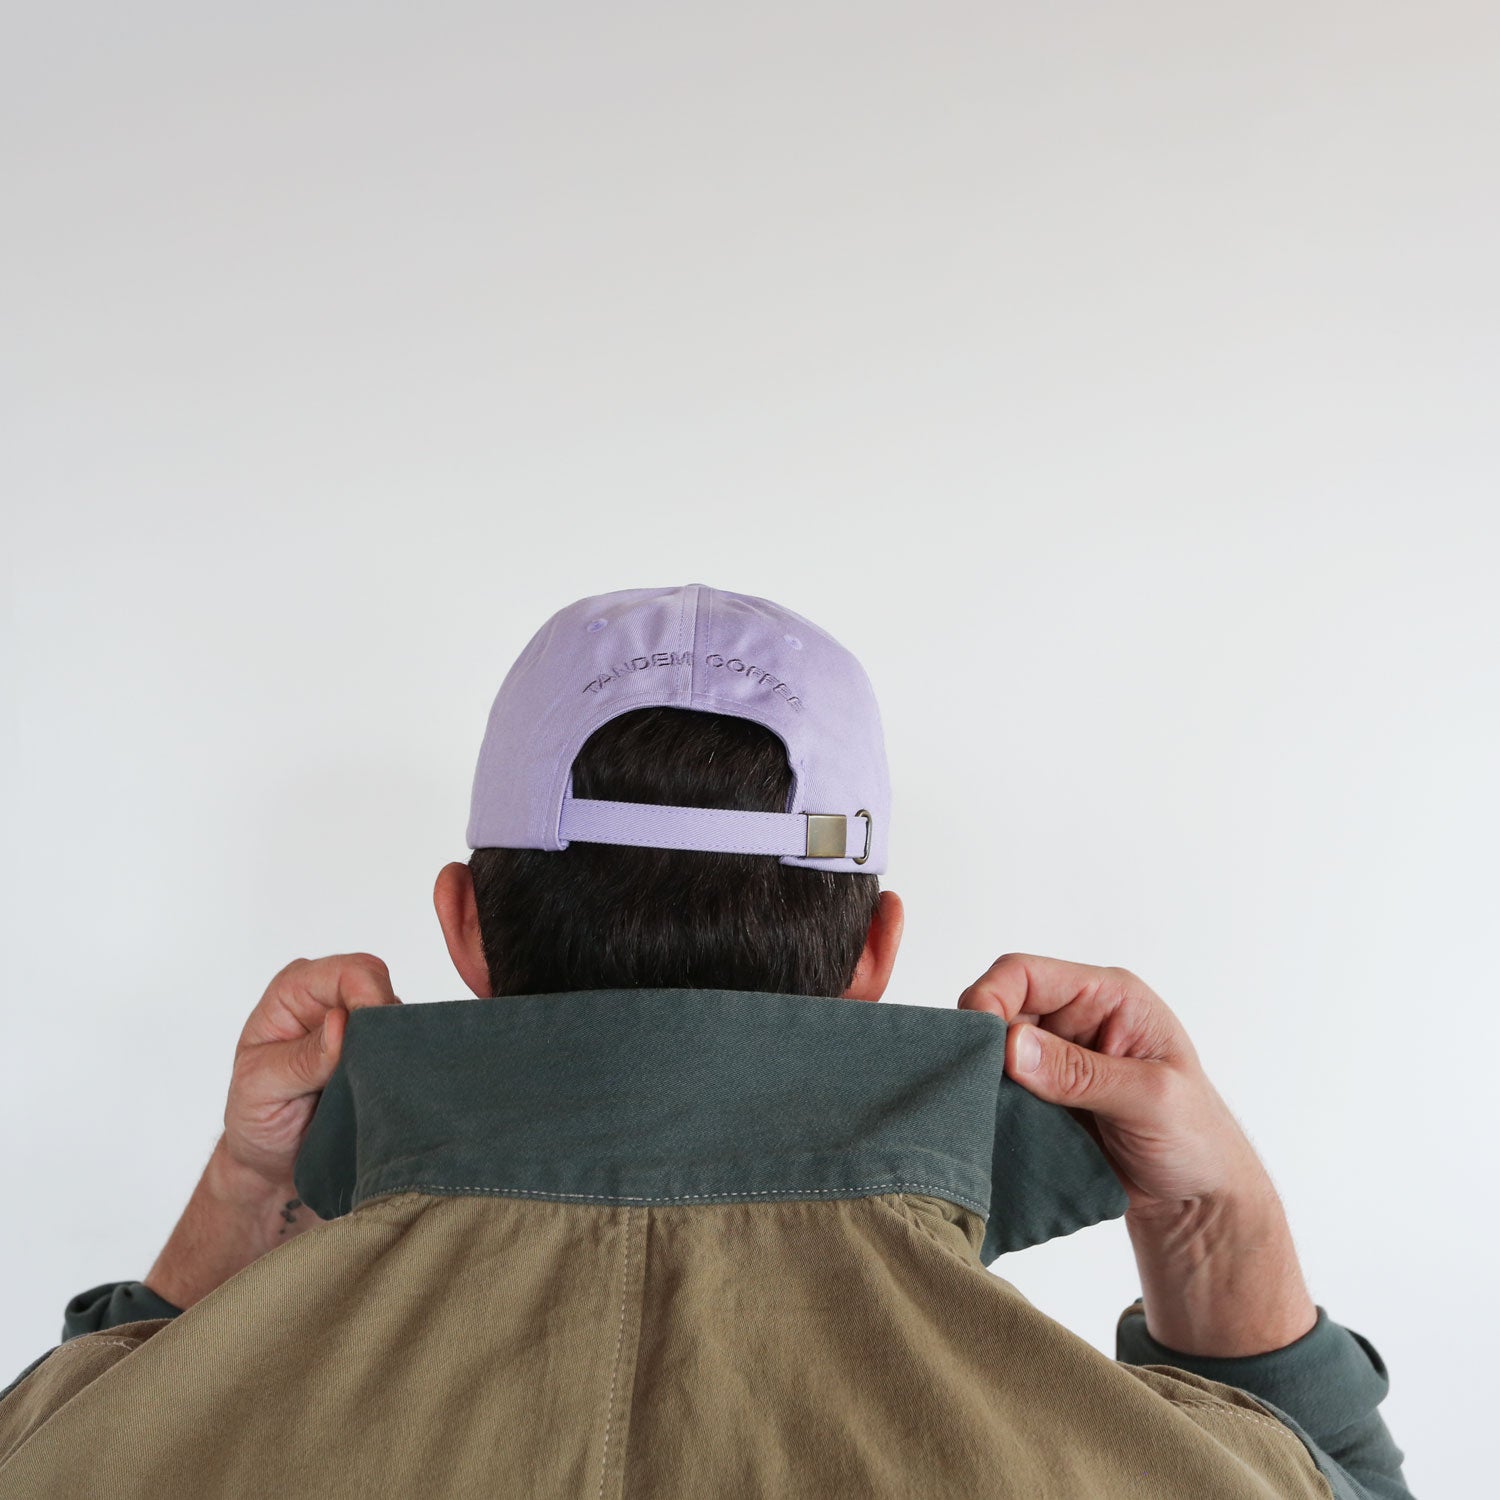 A person wearing a two-toned green jacket and a white shirt adjusts a Lilac Logo Dad Hat from Tandem Coffee Roasters made of 100% cotton with an embroidered bicycle logo. The person’s face is mostly obscured by the hat, and they have a small tattoo on their right wrist. The background is plain white.